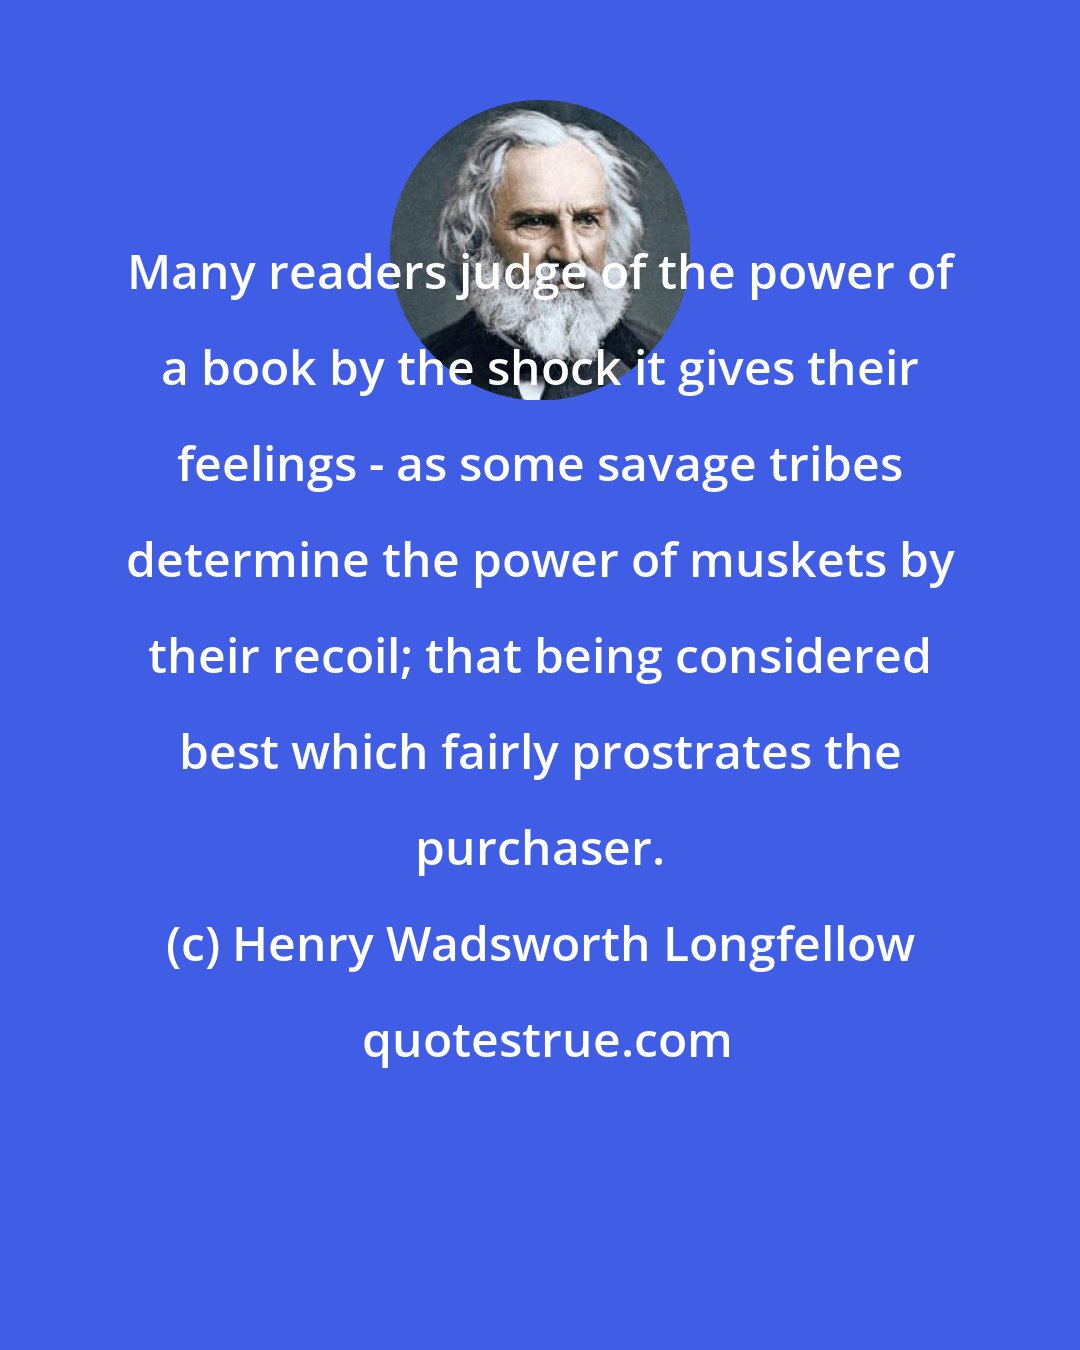 Henry Wadsworth Longfellow: Many readers judge of the power of a book by the shock it gives their feelings - as some savage tribes determine the power of muskets by their recoil; that being considered best which fairly prostrates the purchaser.